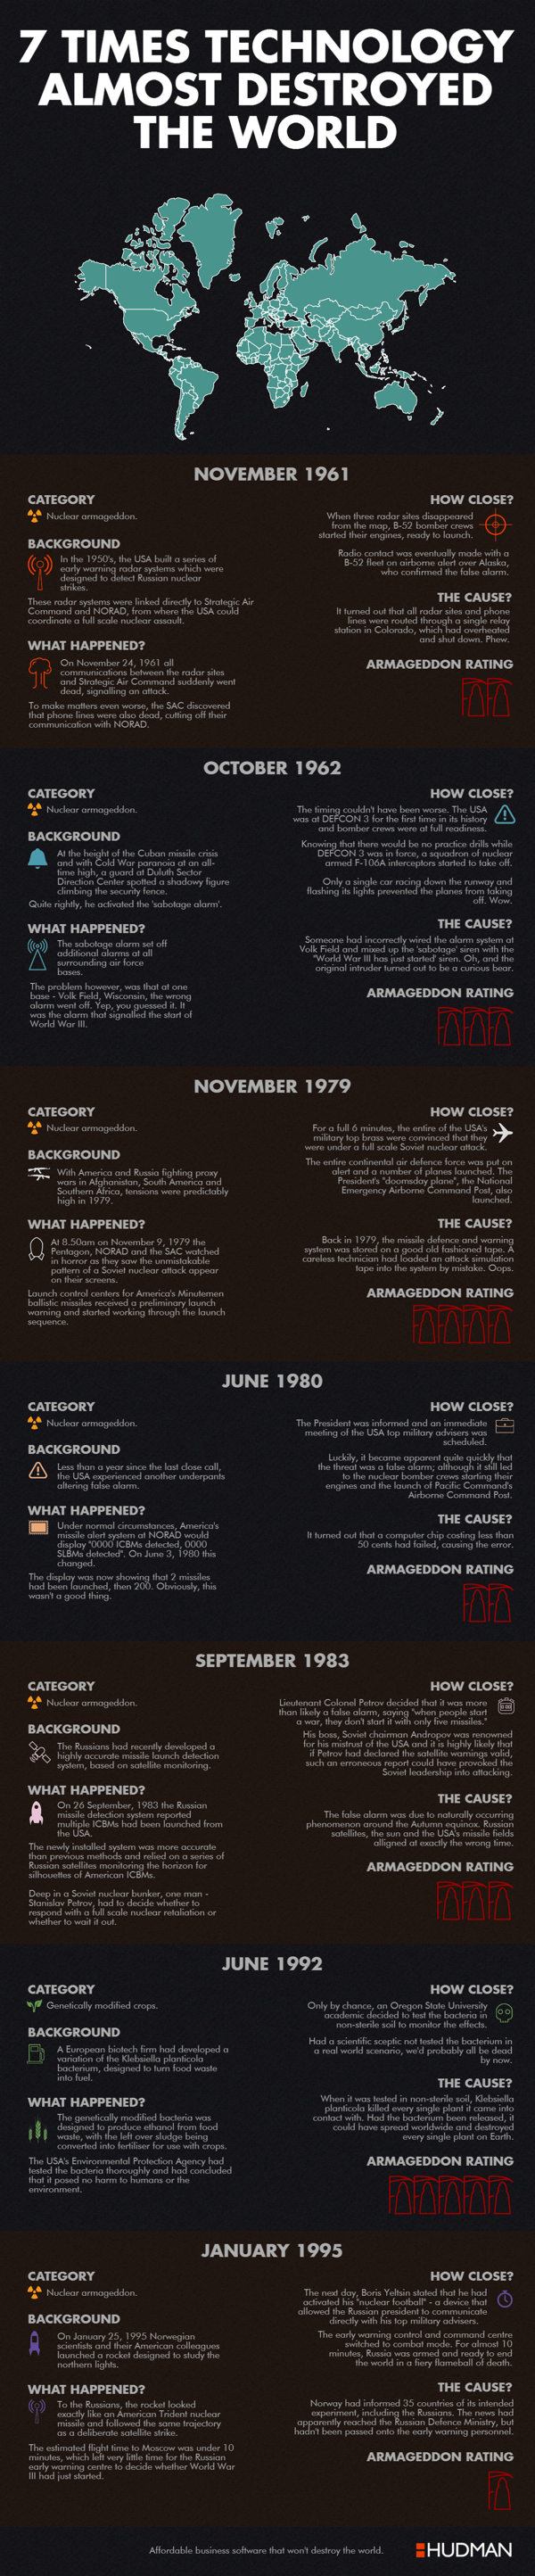 7 Times Technology Almost Destroyed The World infographic